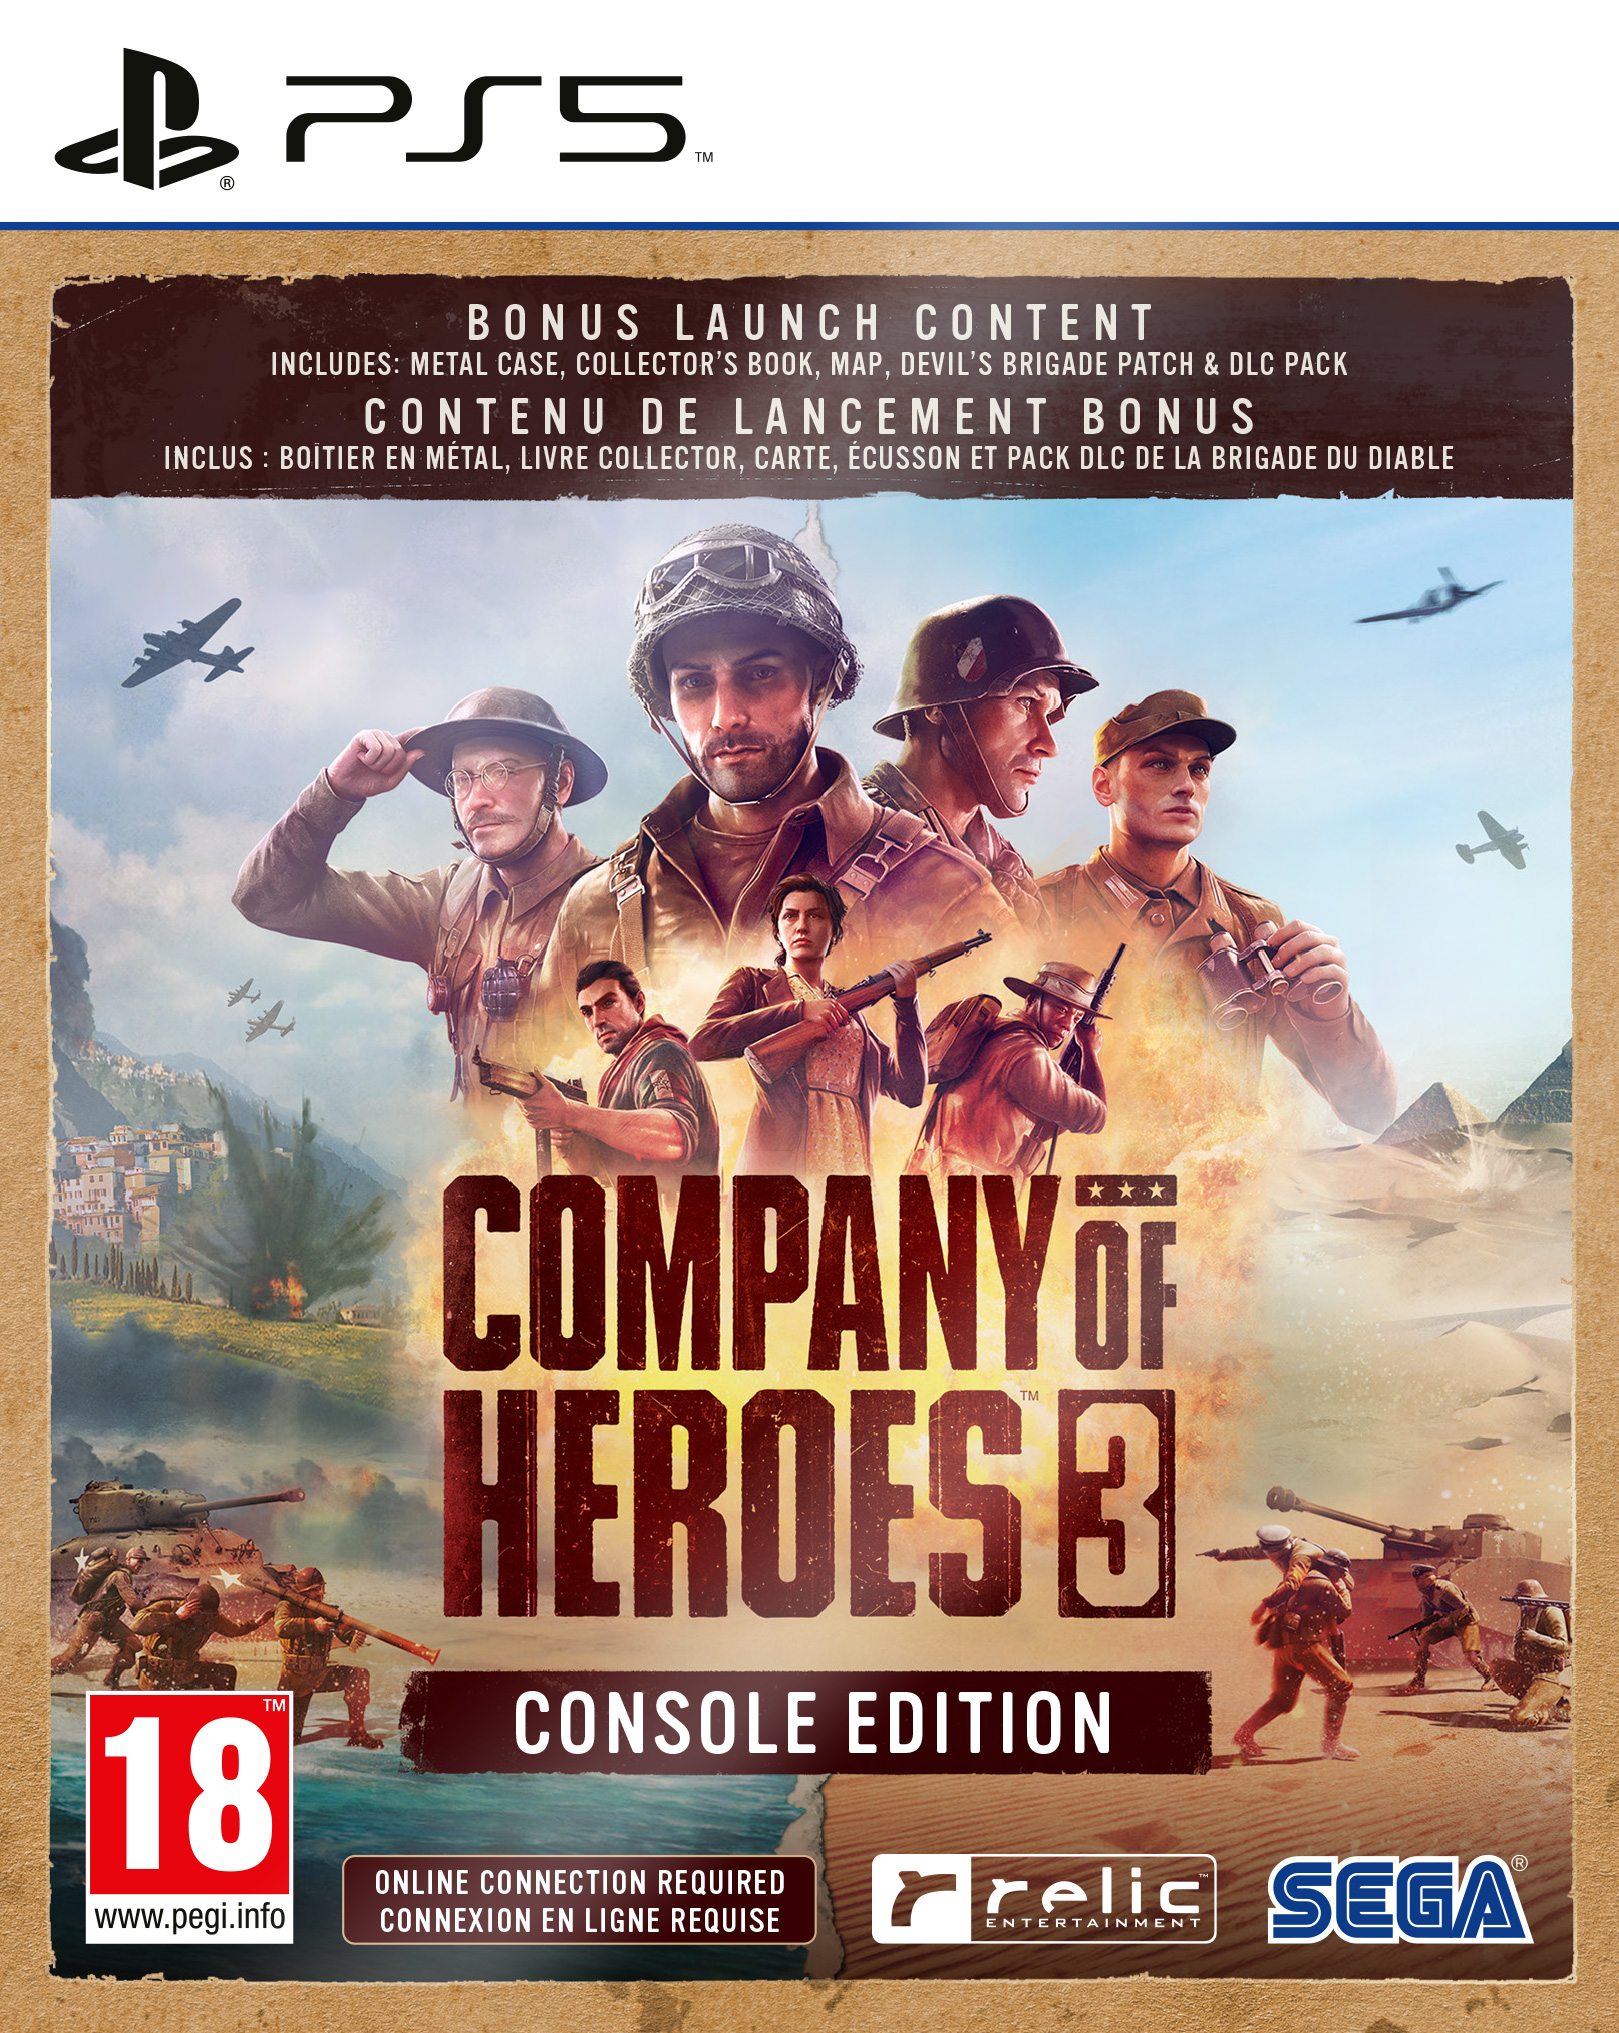 PS5 Company of Heroes 3 - Metalcase Edition